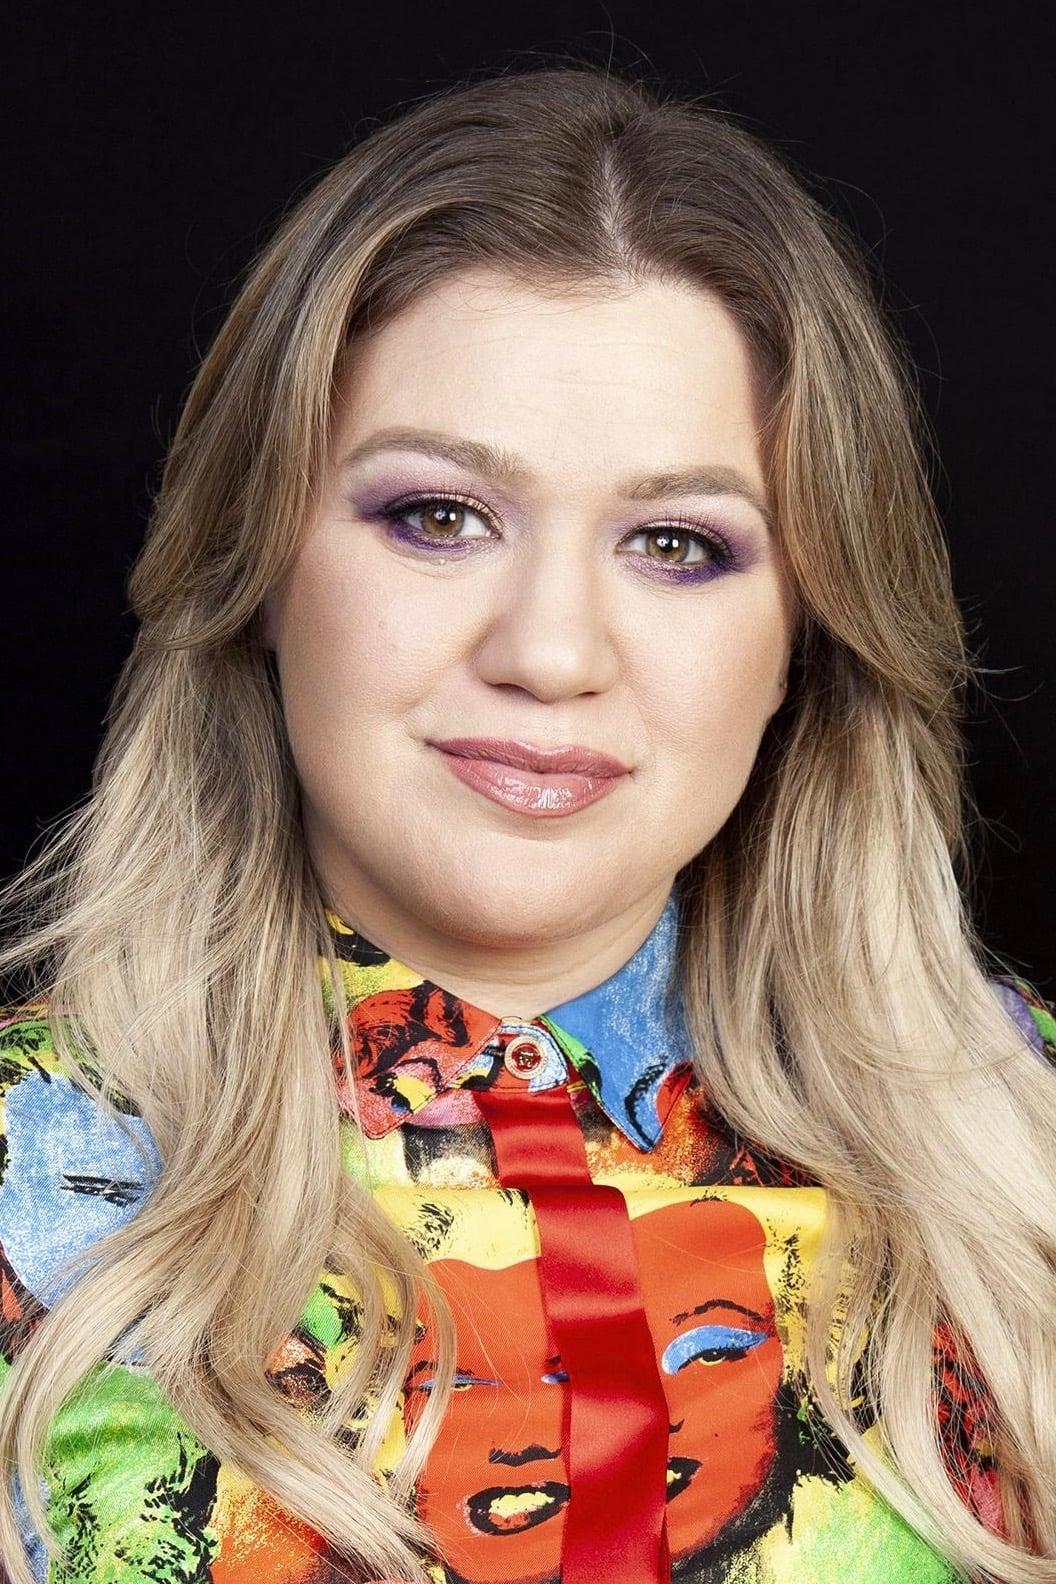 Kelly Clarkson poster